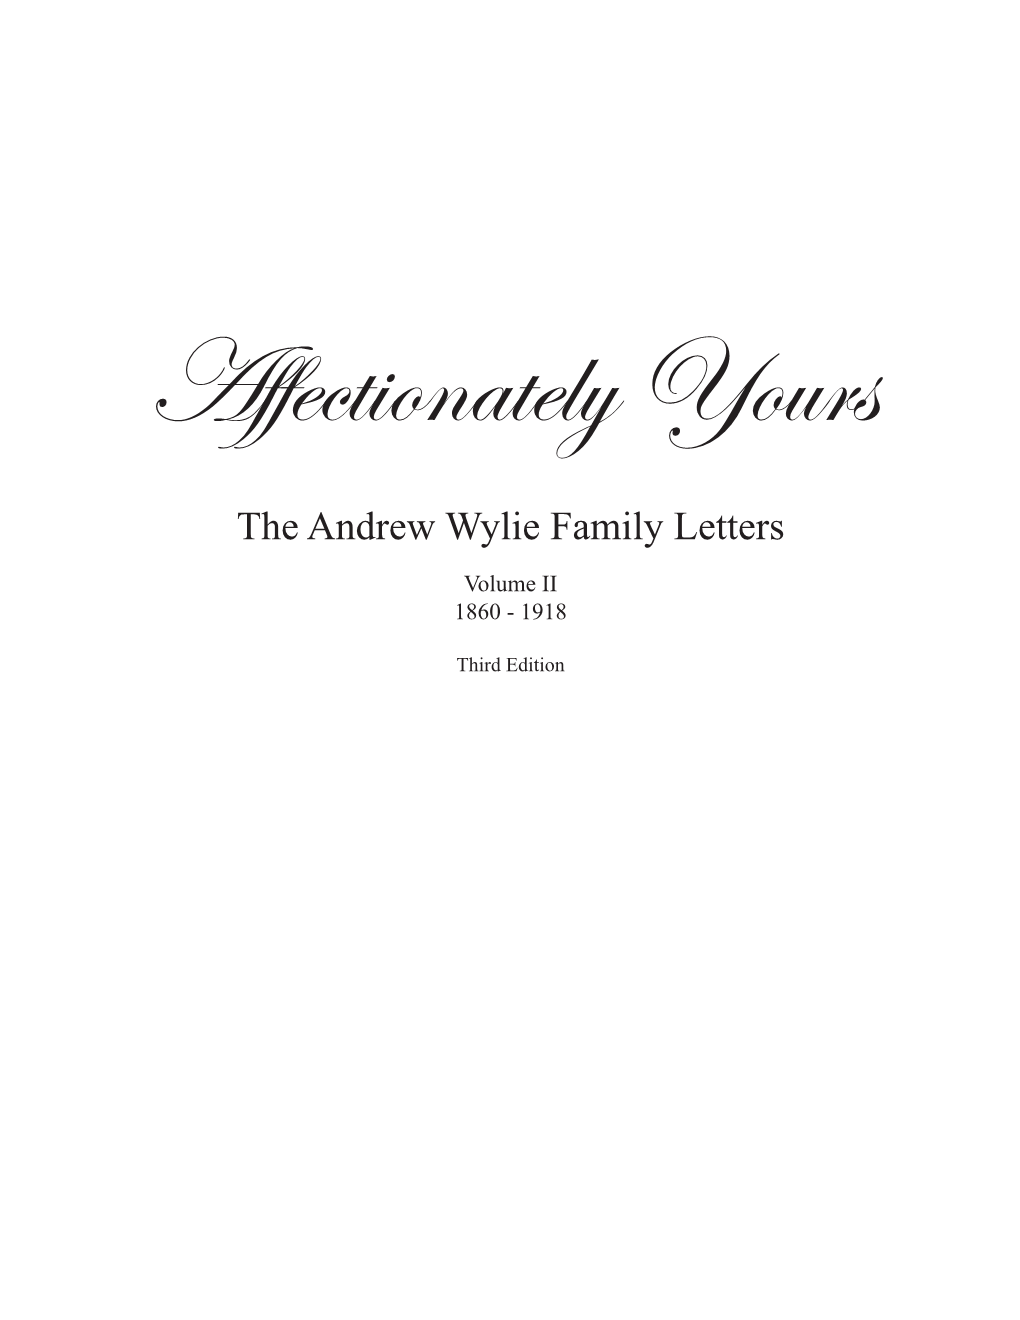 The Andrew Wylie Family Letters